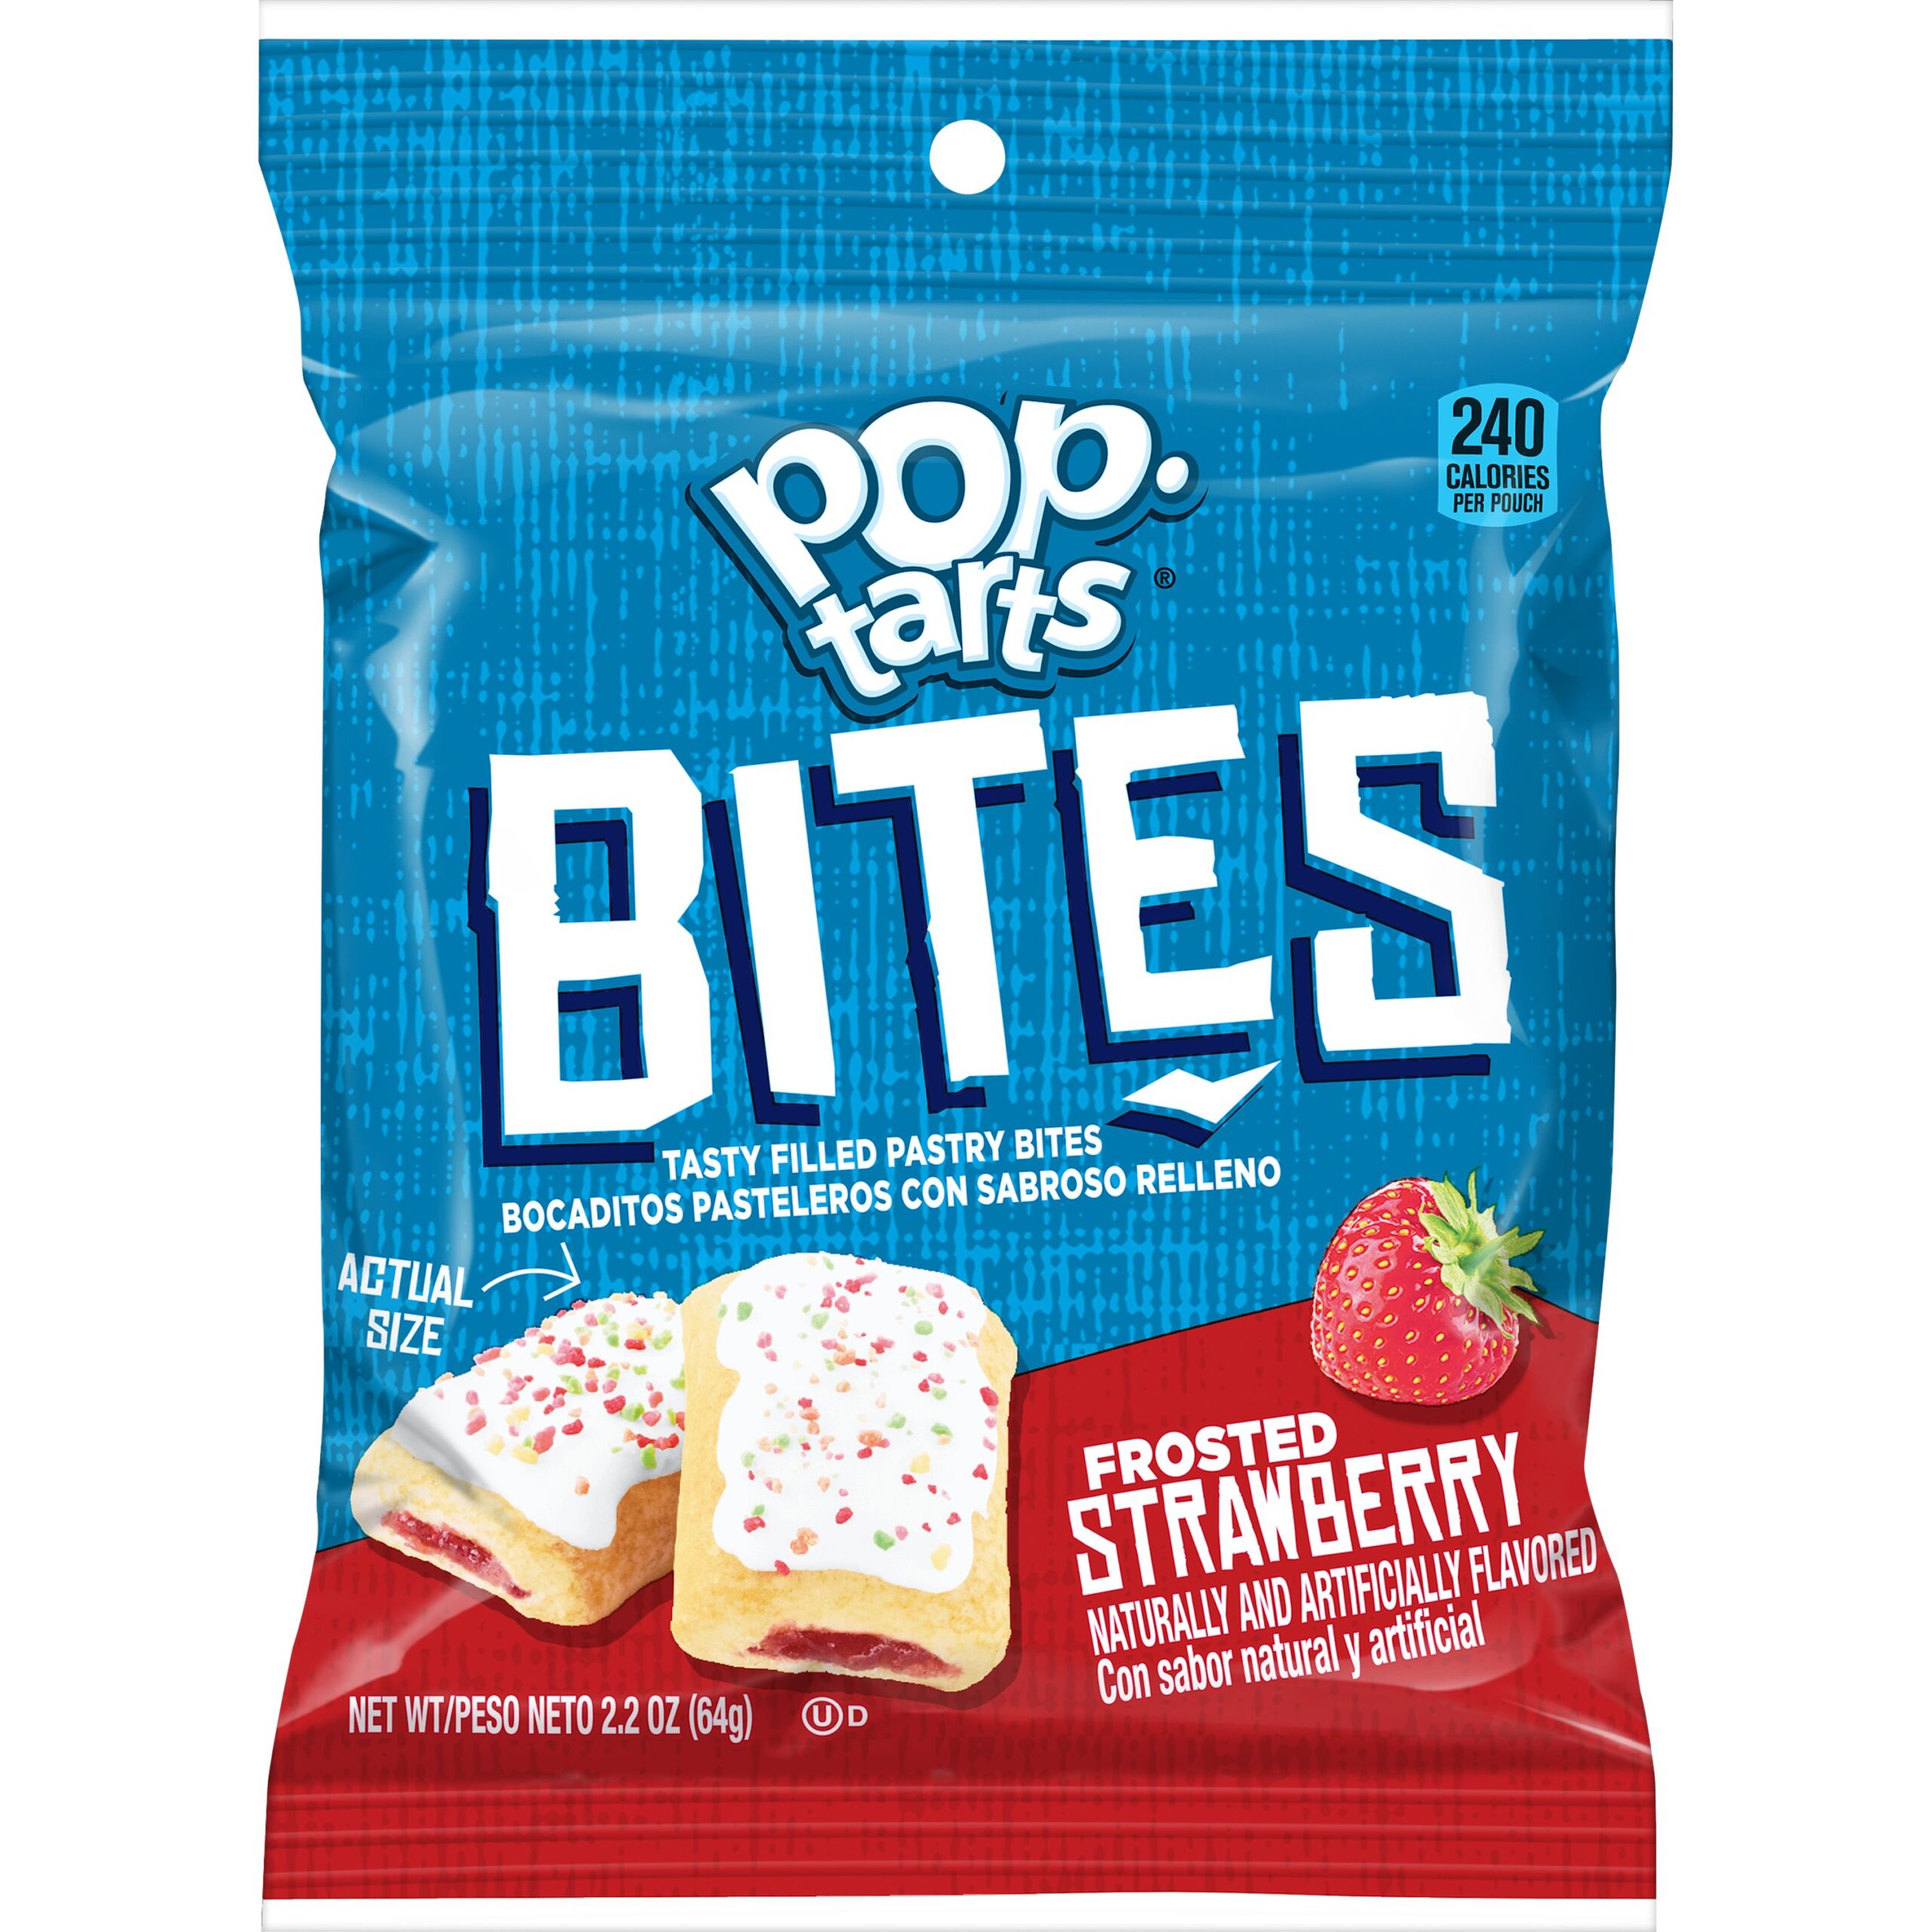 complicaties gallon Doodskaak Pop-Tarts Bites, Tasty Filled Pastry Bites, Frosted Strawberry, 2.2 Oz –  CrowdedLine Delivery